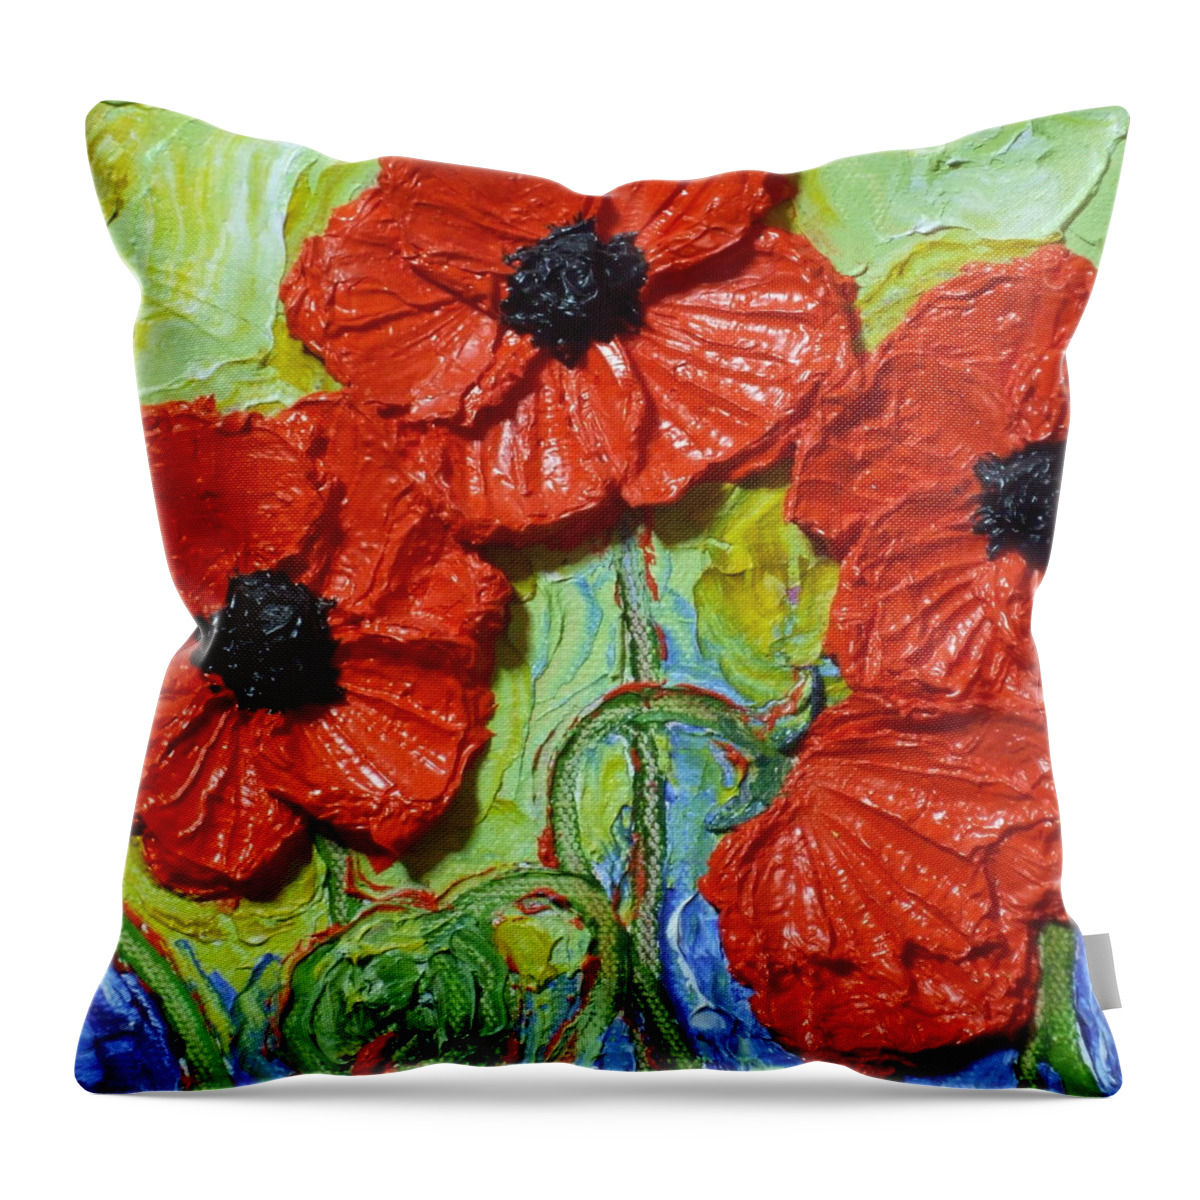 Poppies Throw Pillow featuring the painting Paris' Poppies in Red by Paris Wyatt Llanso